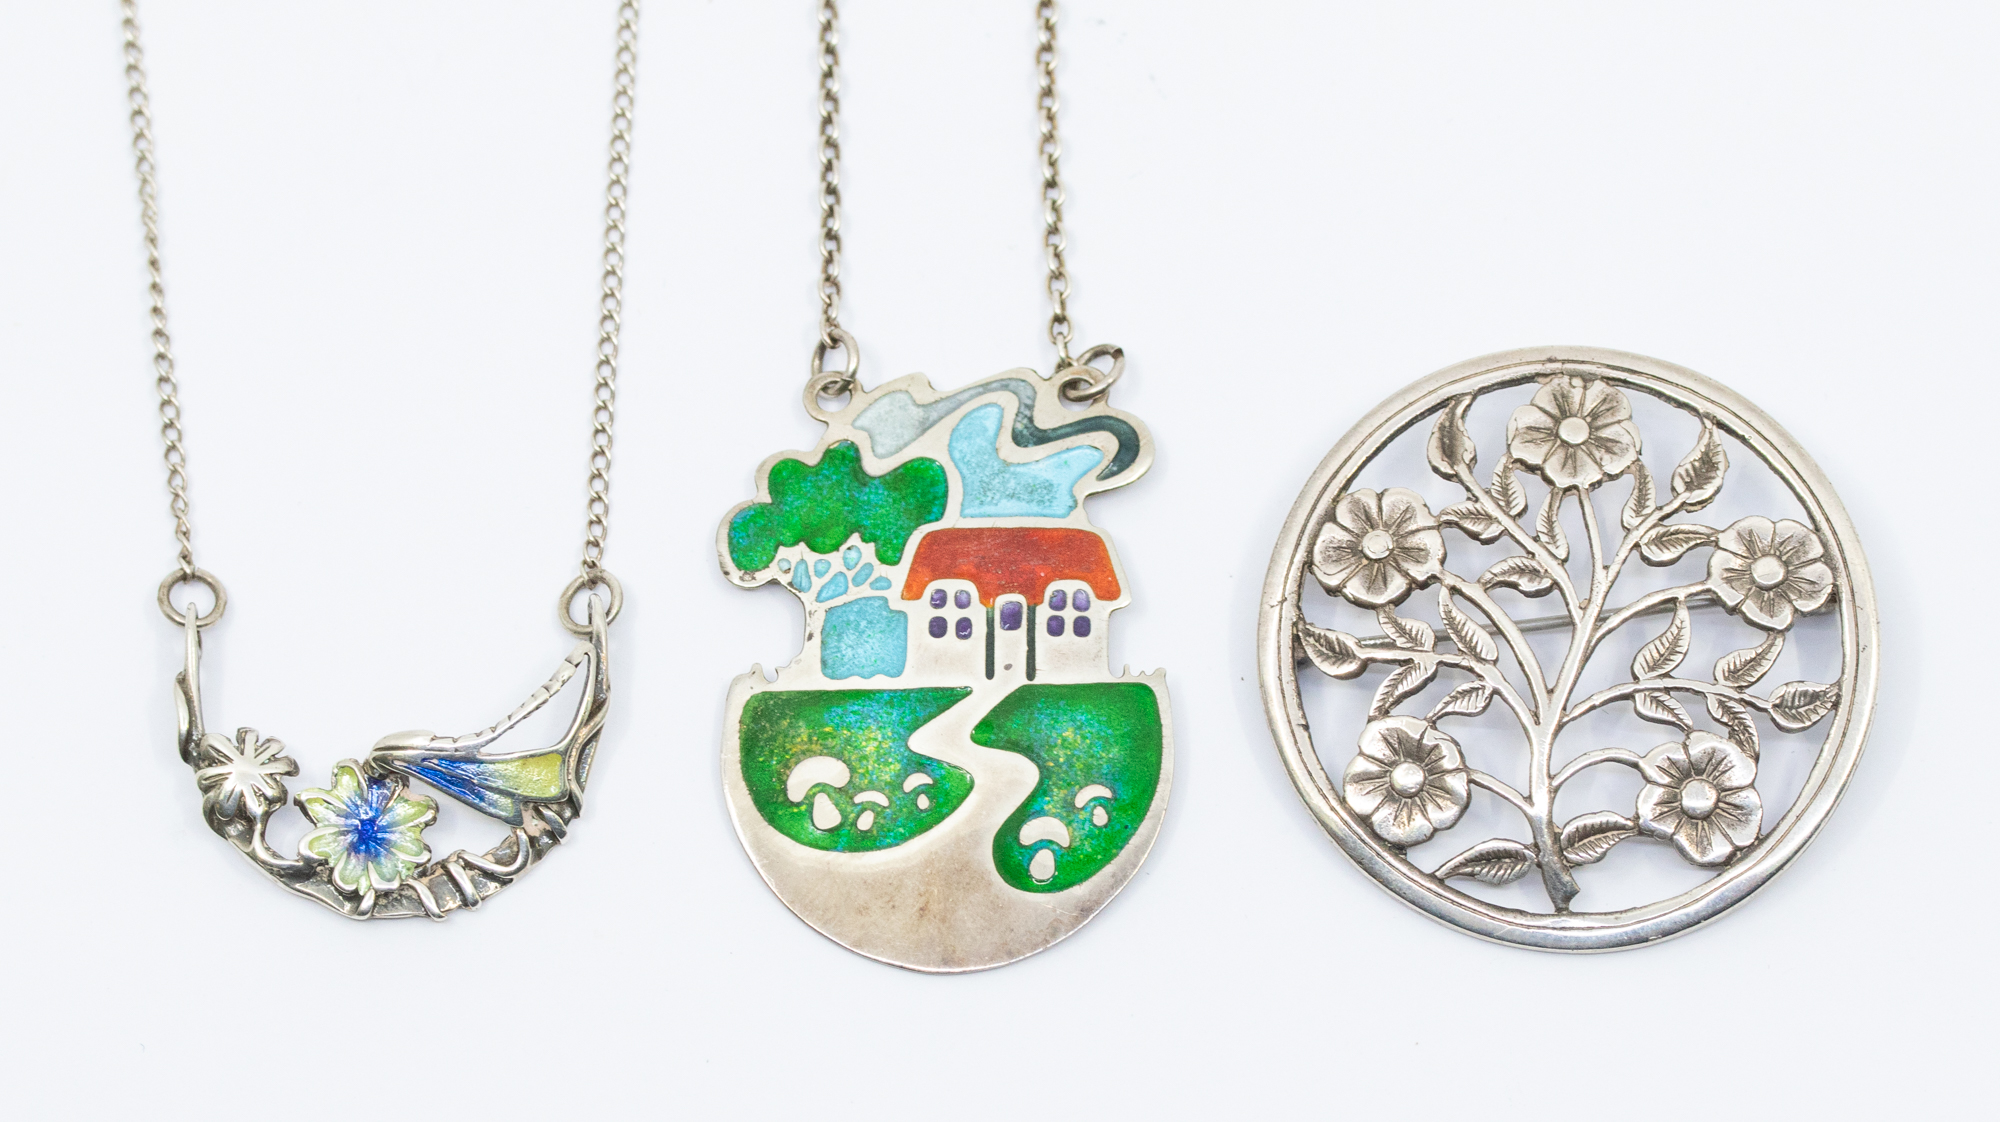 Scottish Interest: a Norman Grant silver and enamel pendant and chain, the pendant depicting a house